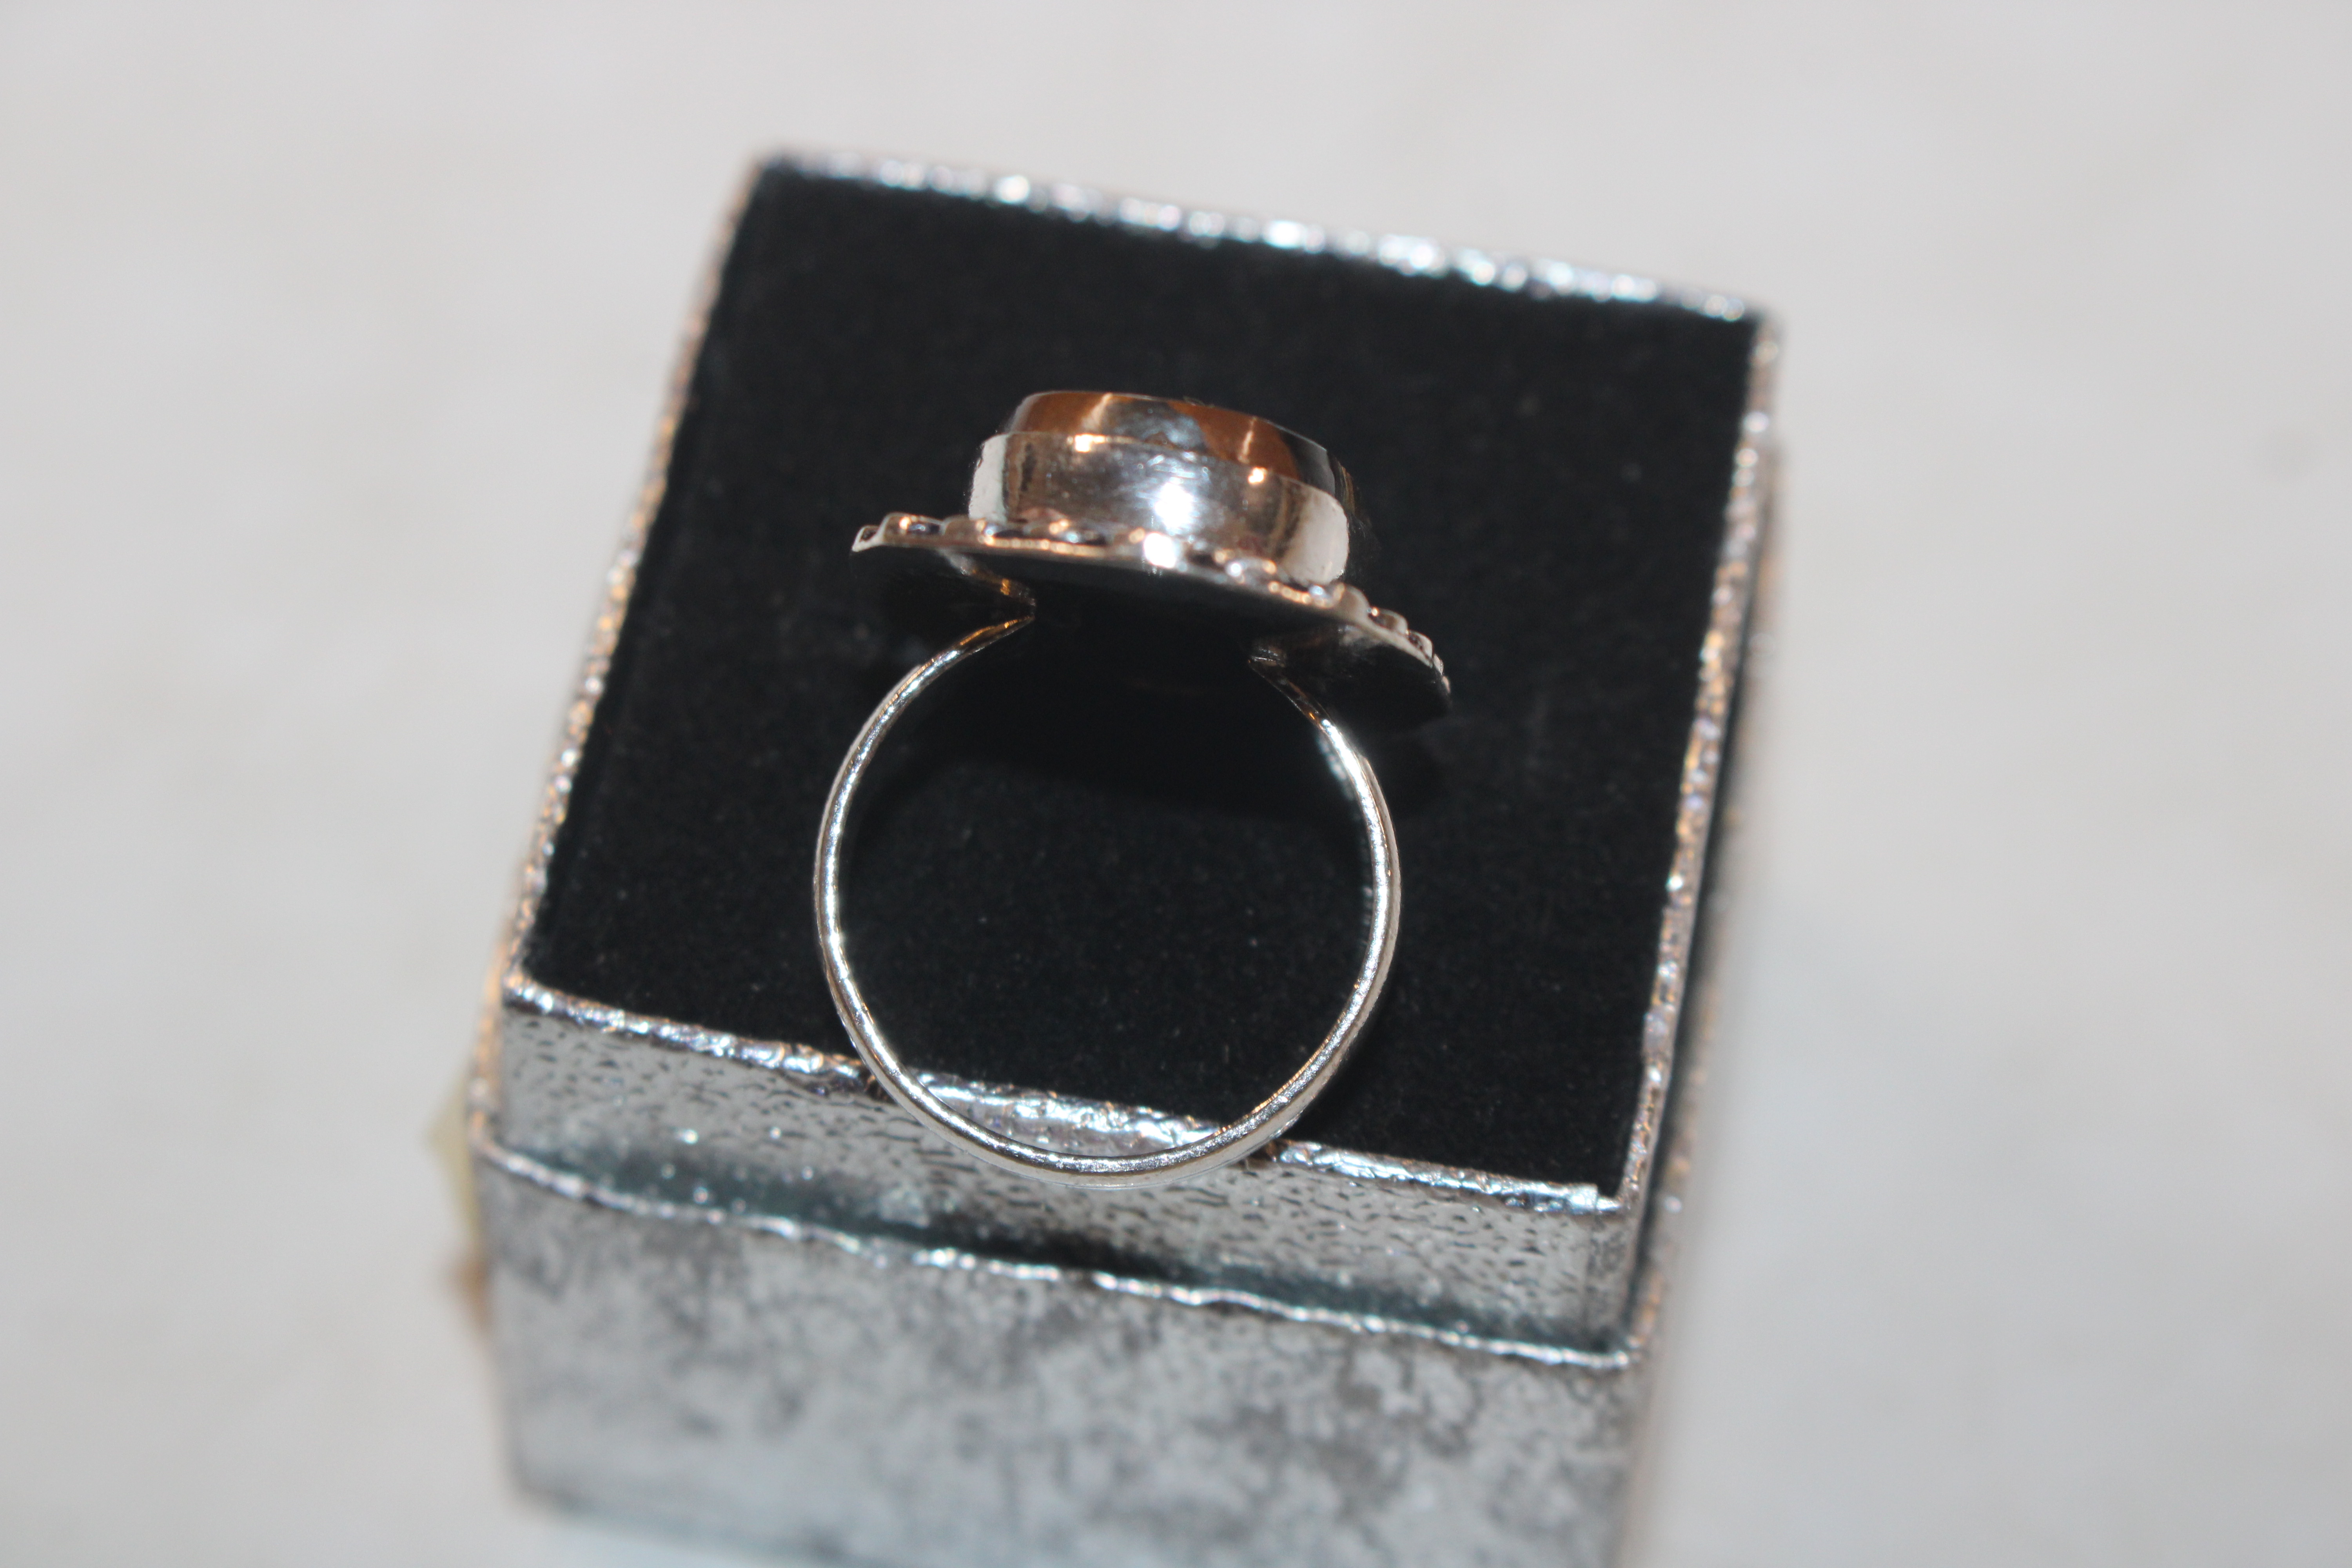 A 925 silver and tigers eye set ring - Image 3 of 4